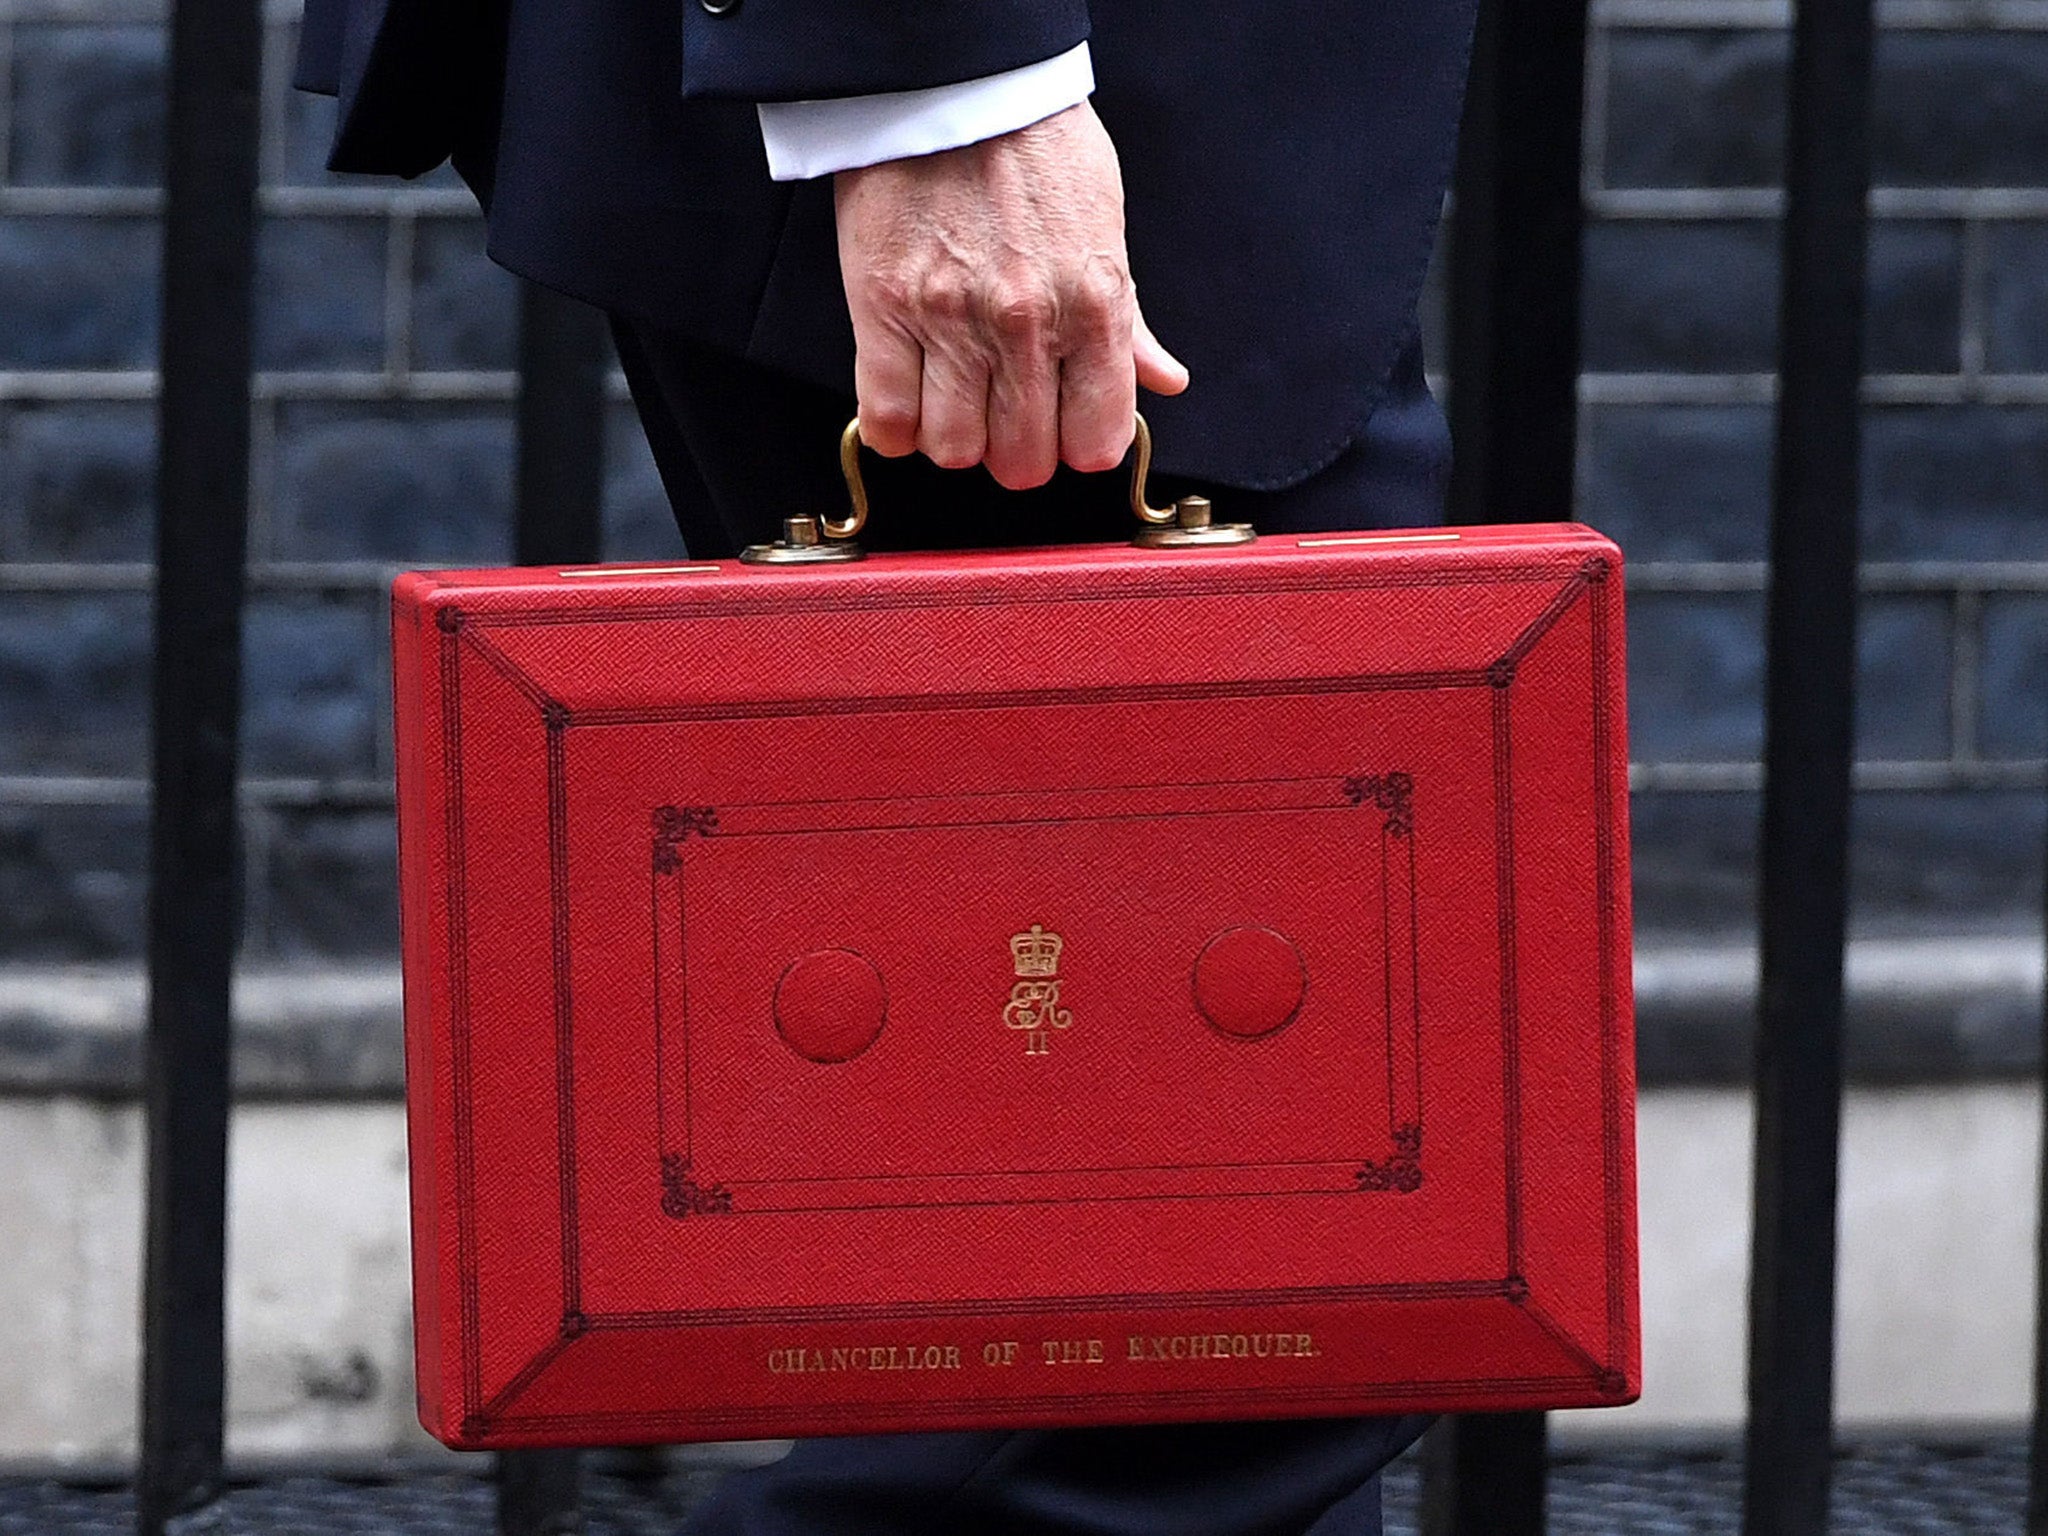 This Budget showed a marked turn in Tory priorities